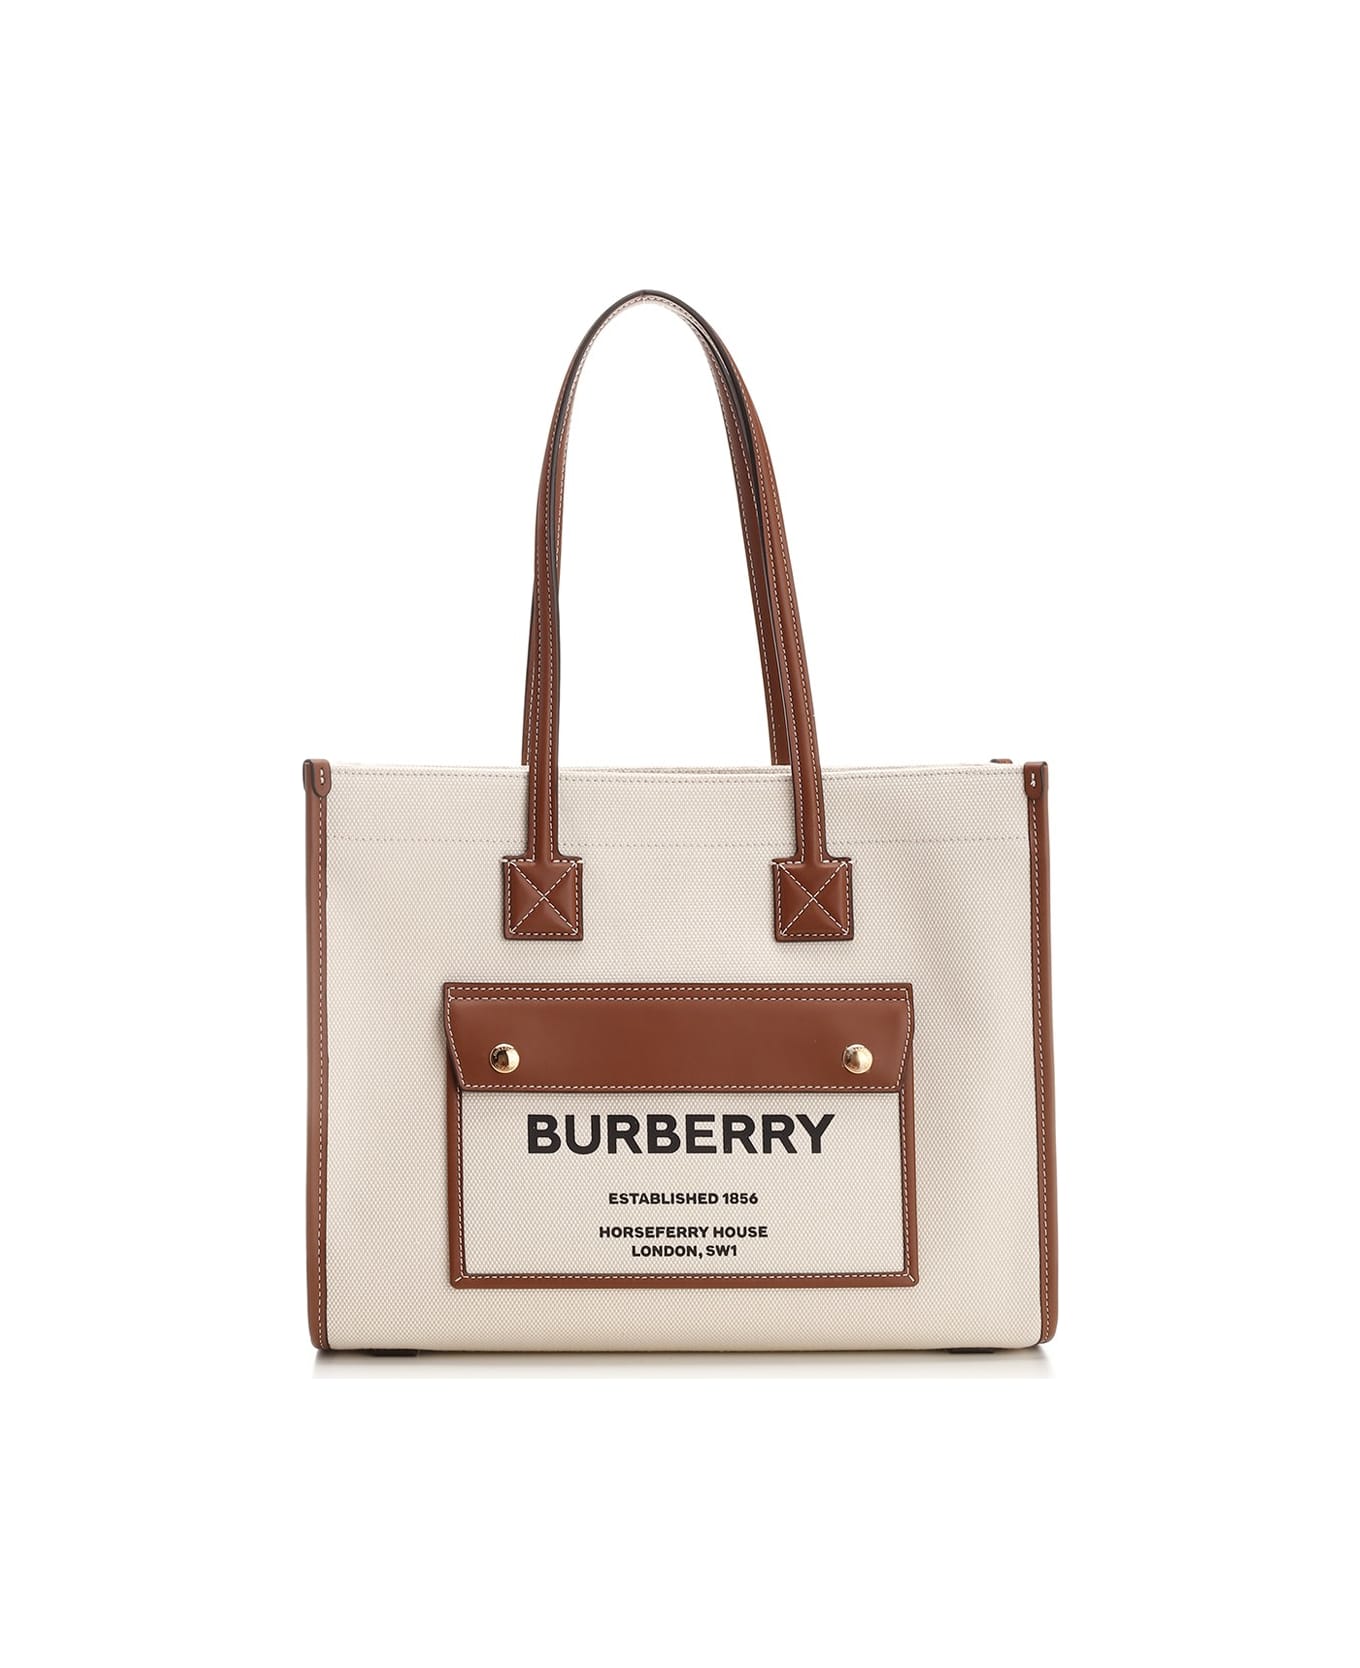 Burberry Tote Bag In Canvas - White トートバッグ